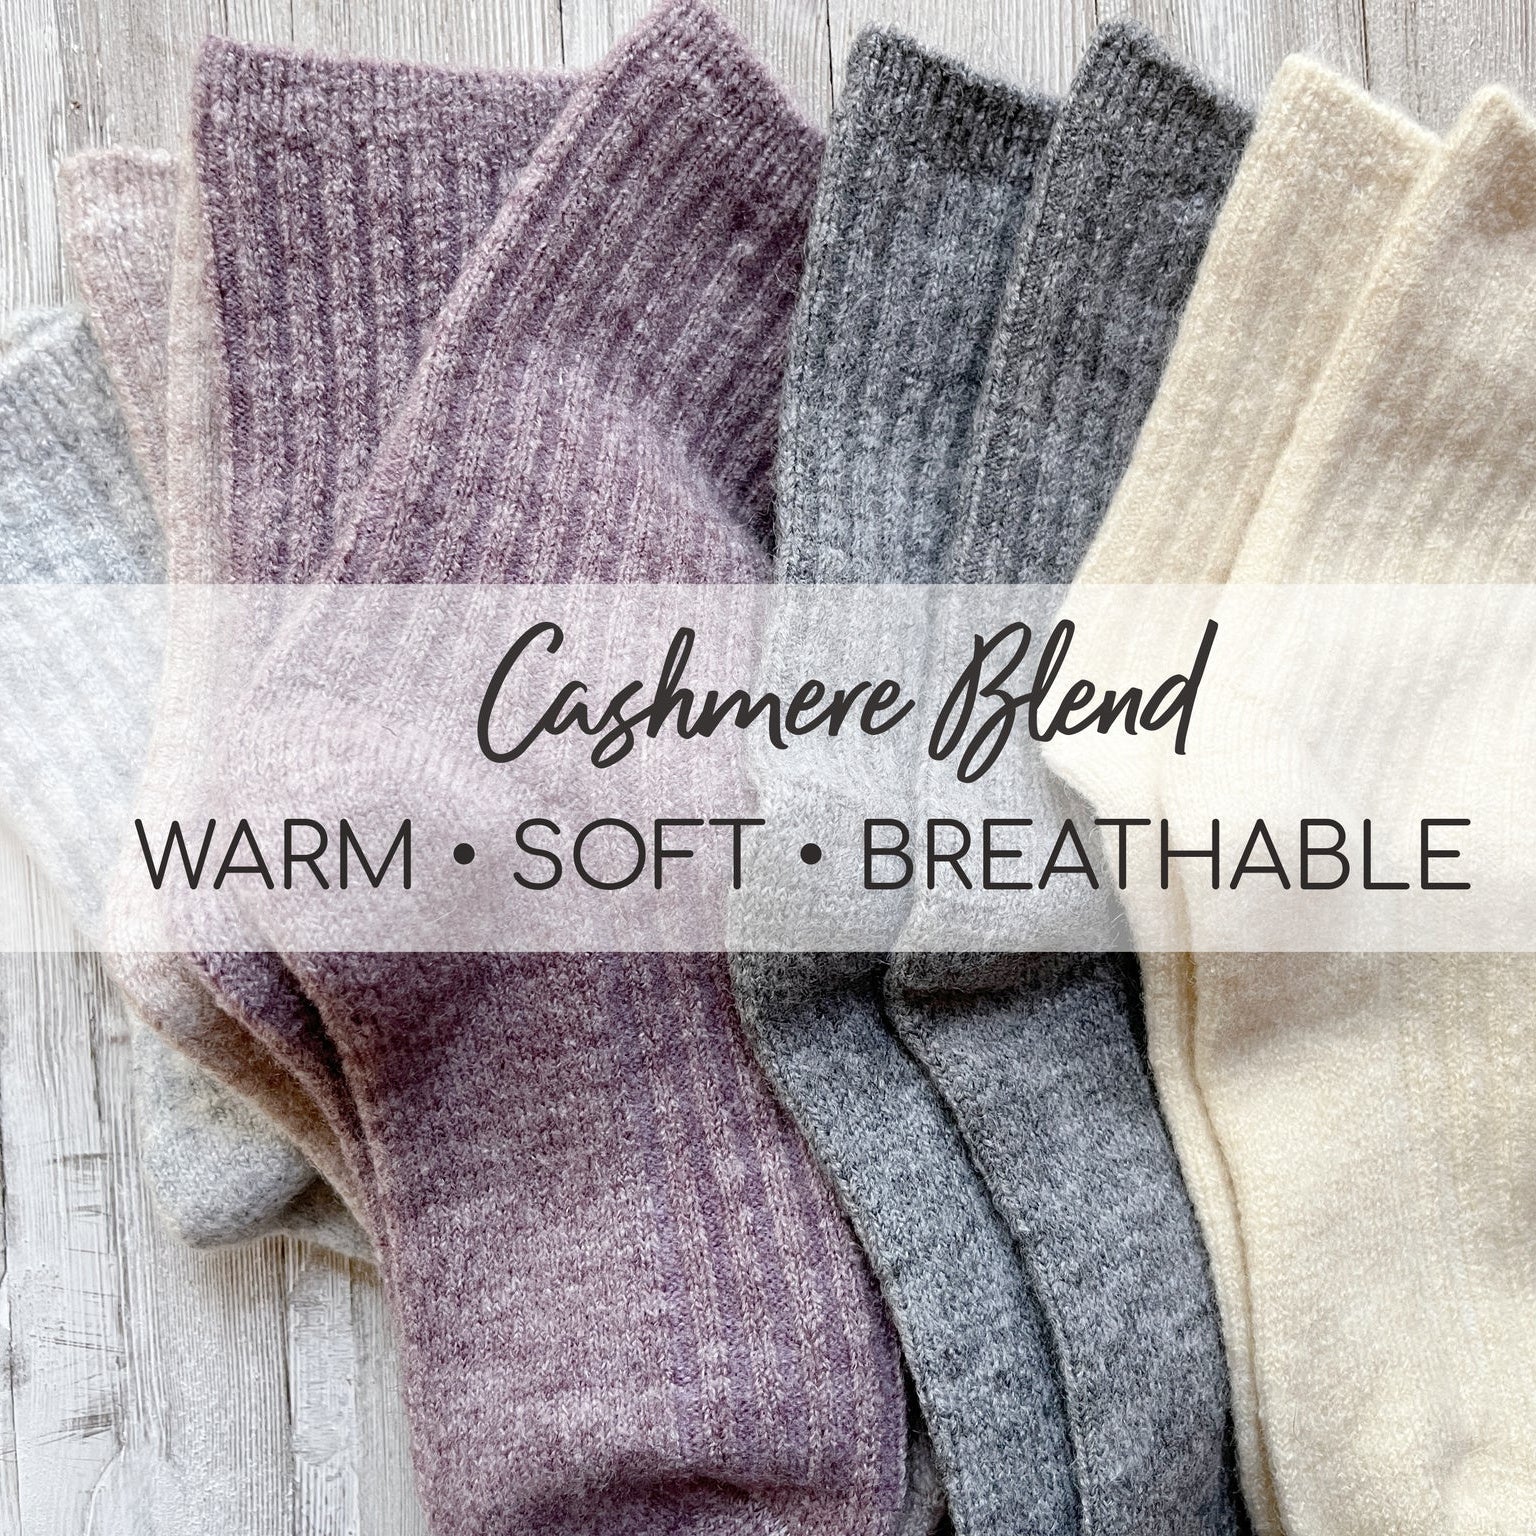 cashmere wool socks for women | Made in Canada wool socks  | Bed socks made with cashmere wool 